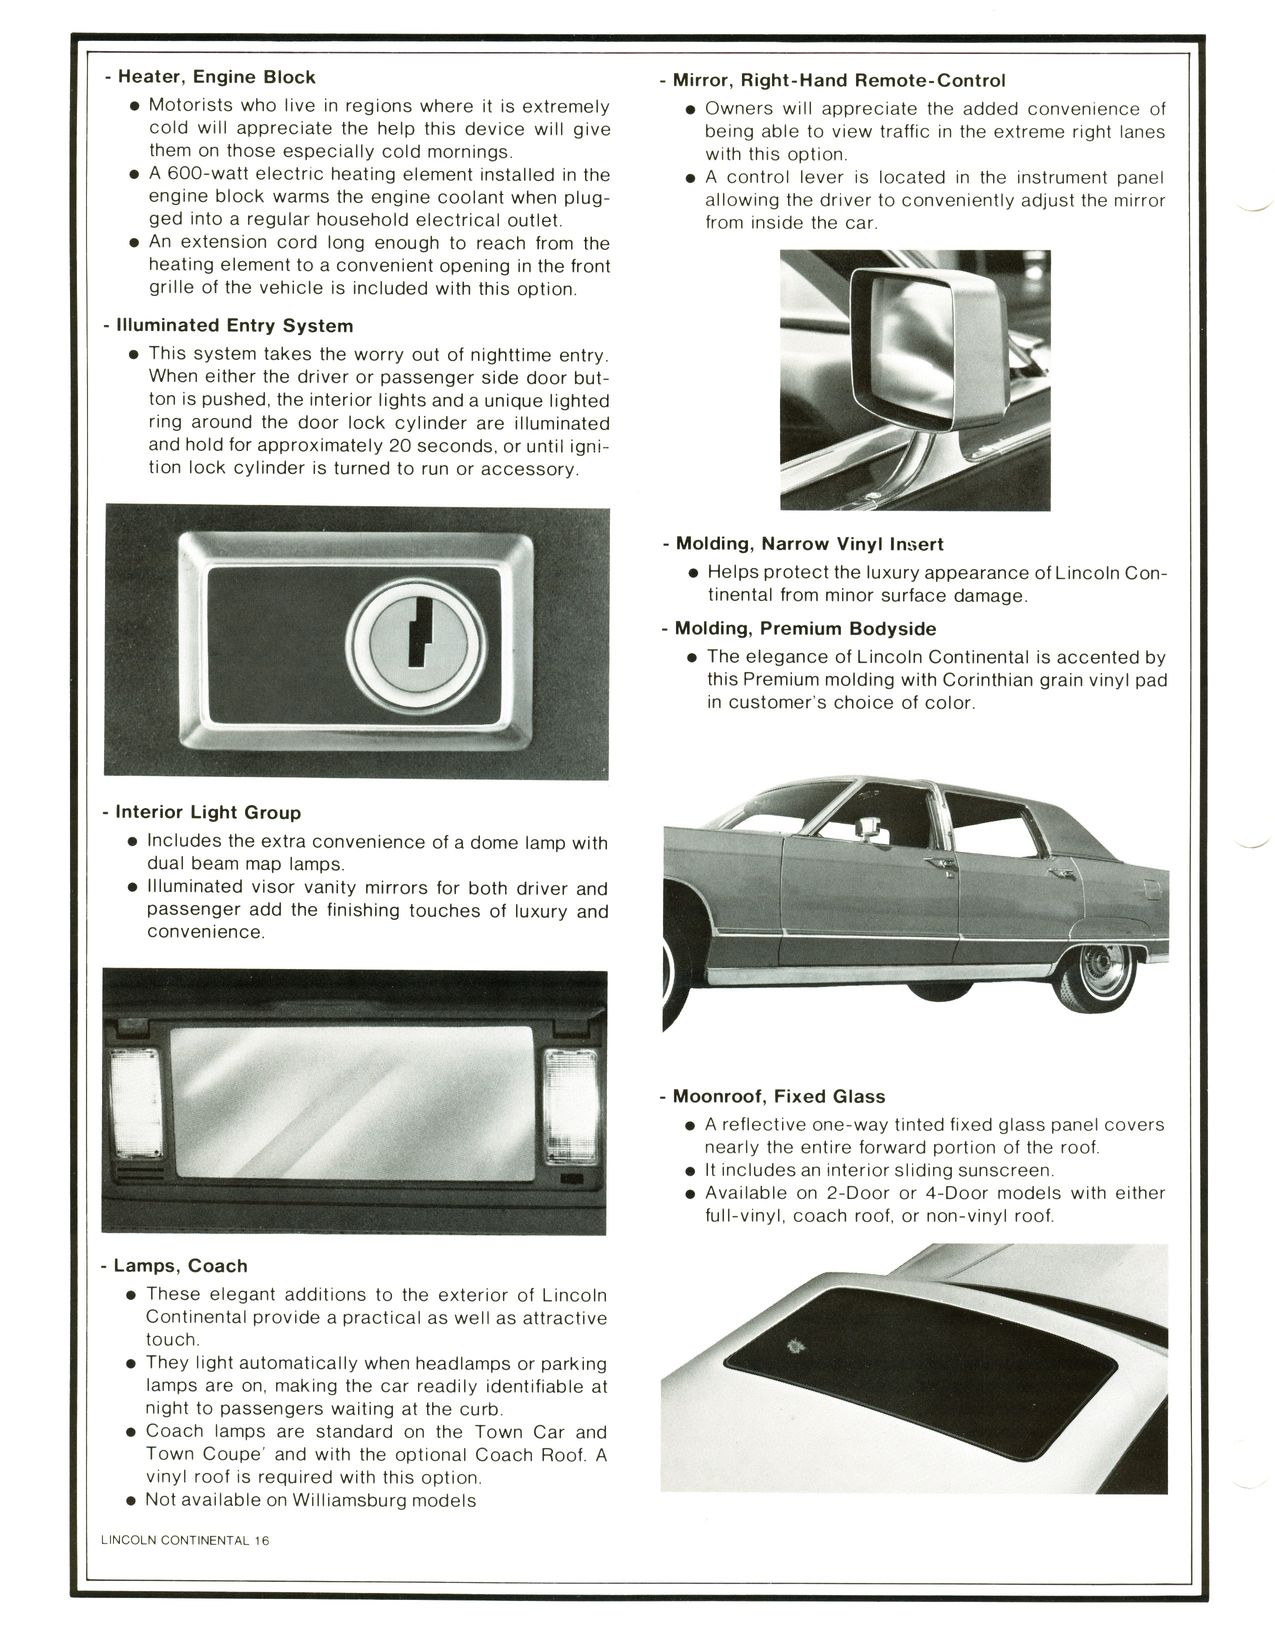 1977 Lincoln Continental Mark V Product Facts Book Page 27